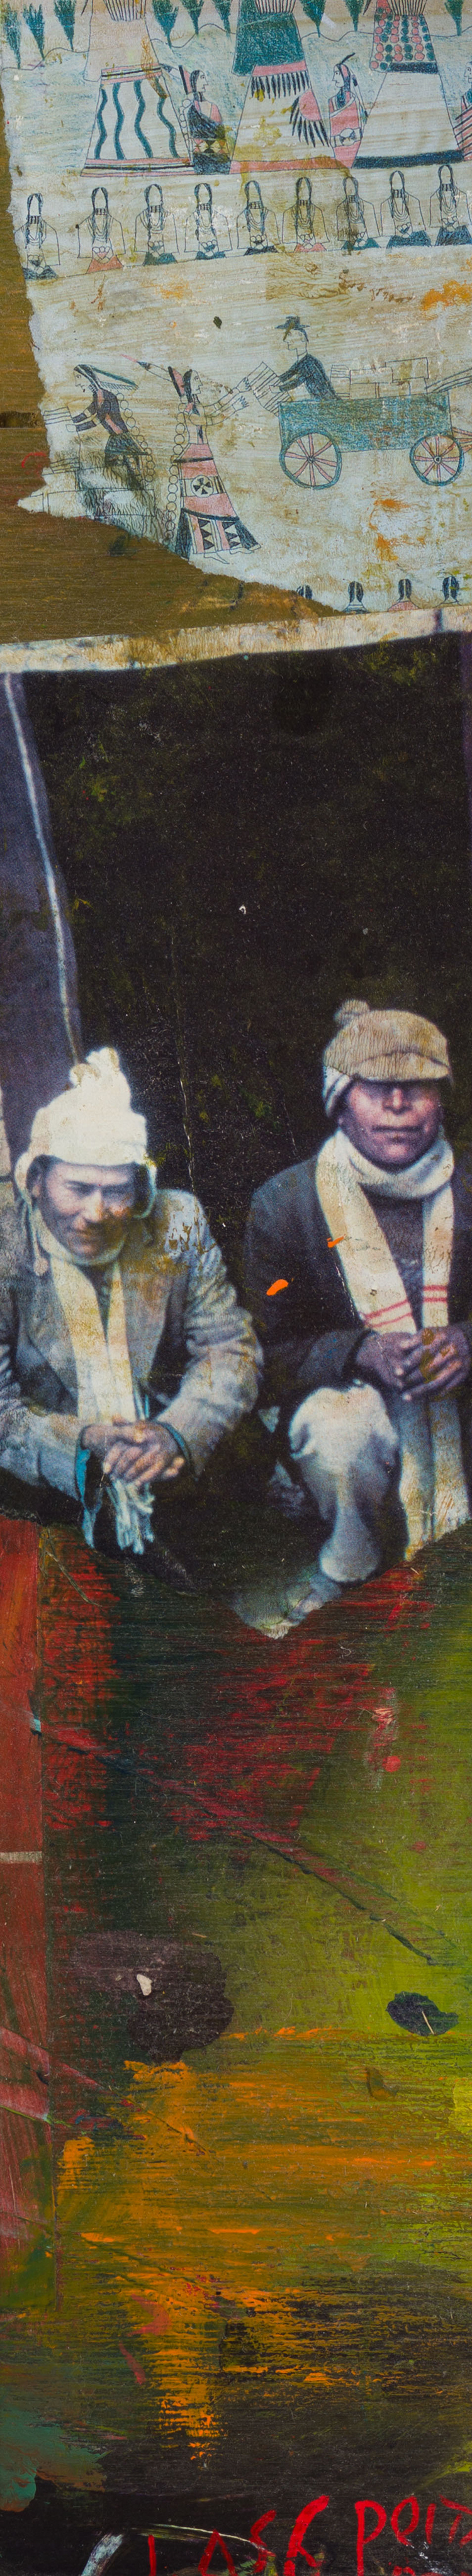 Untitled - Two Native Men by Jane Ash Poitras